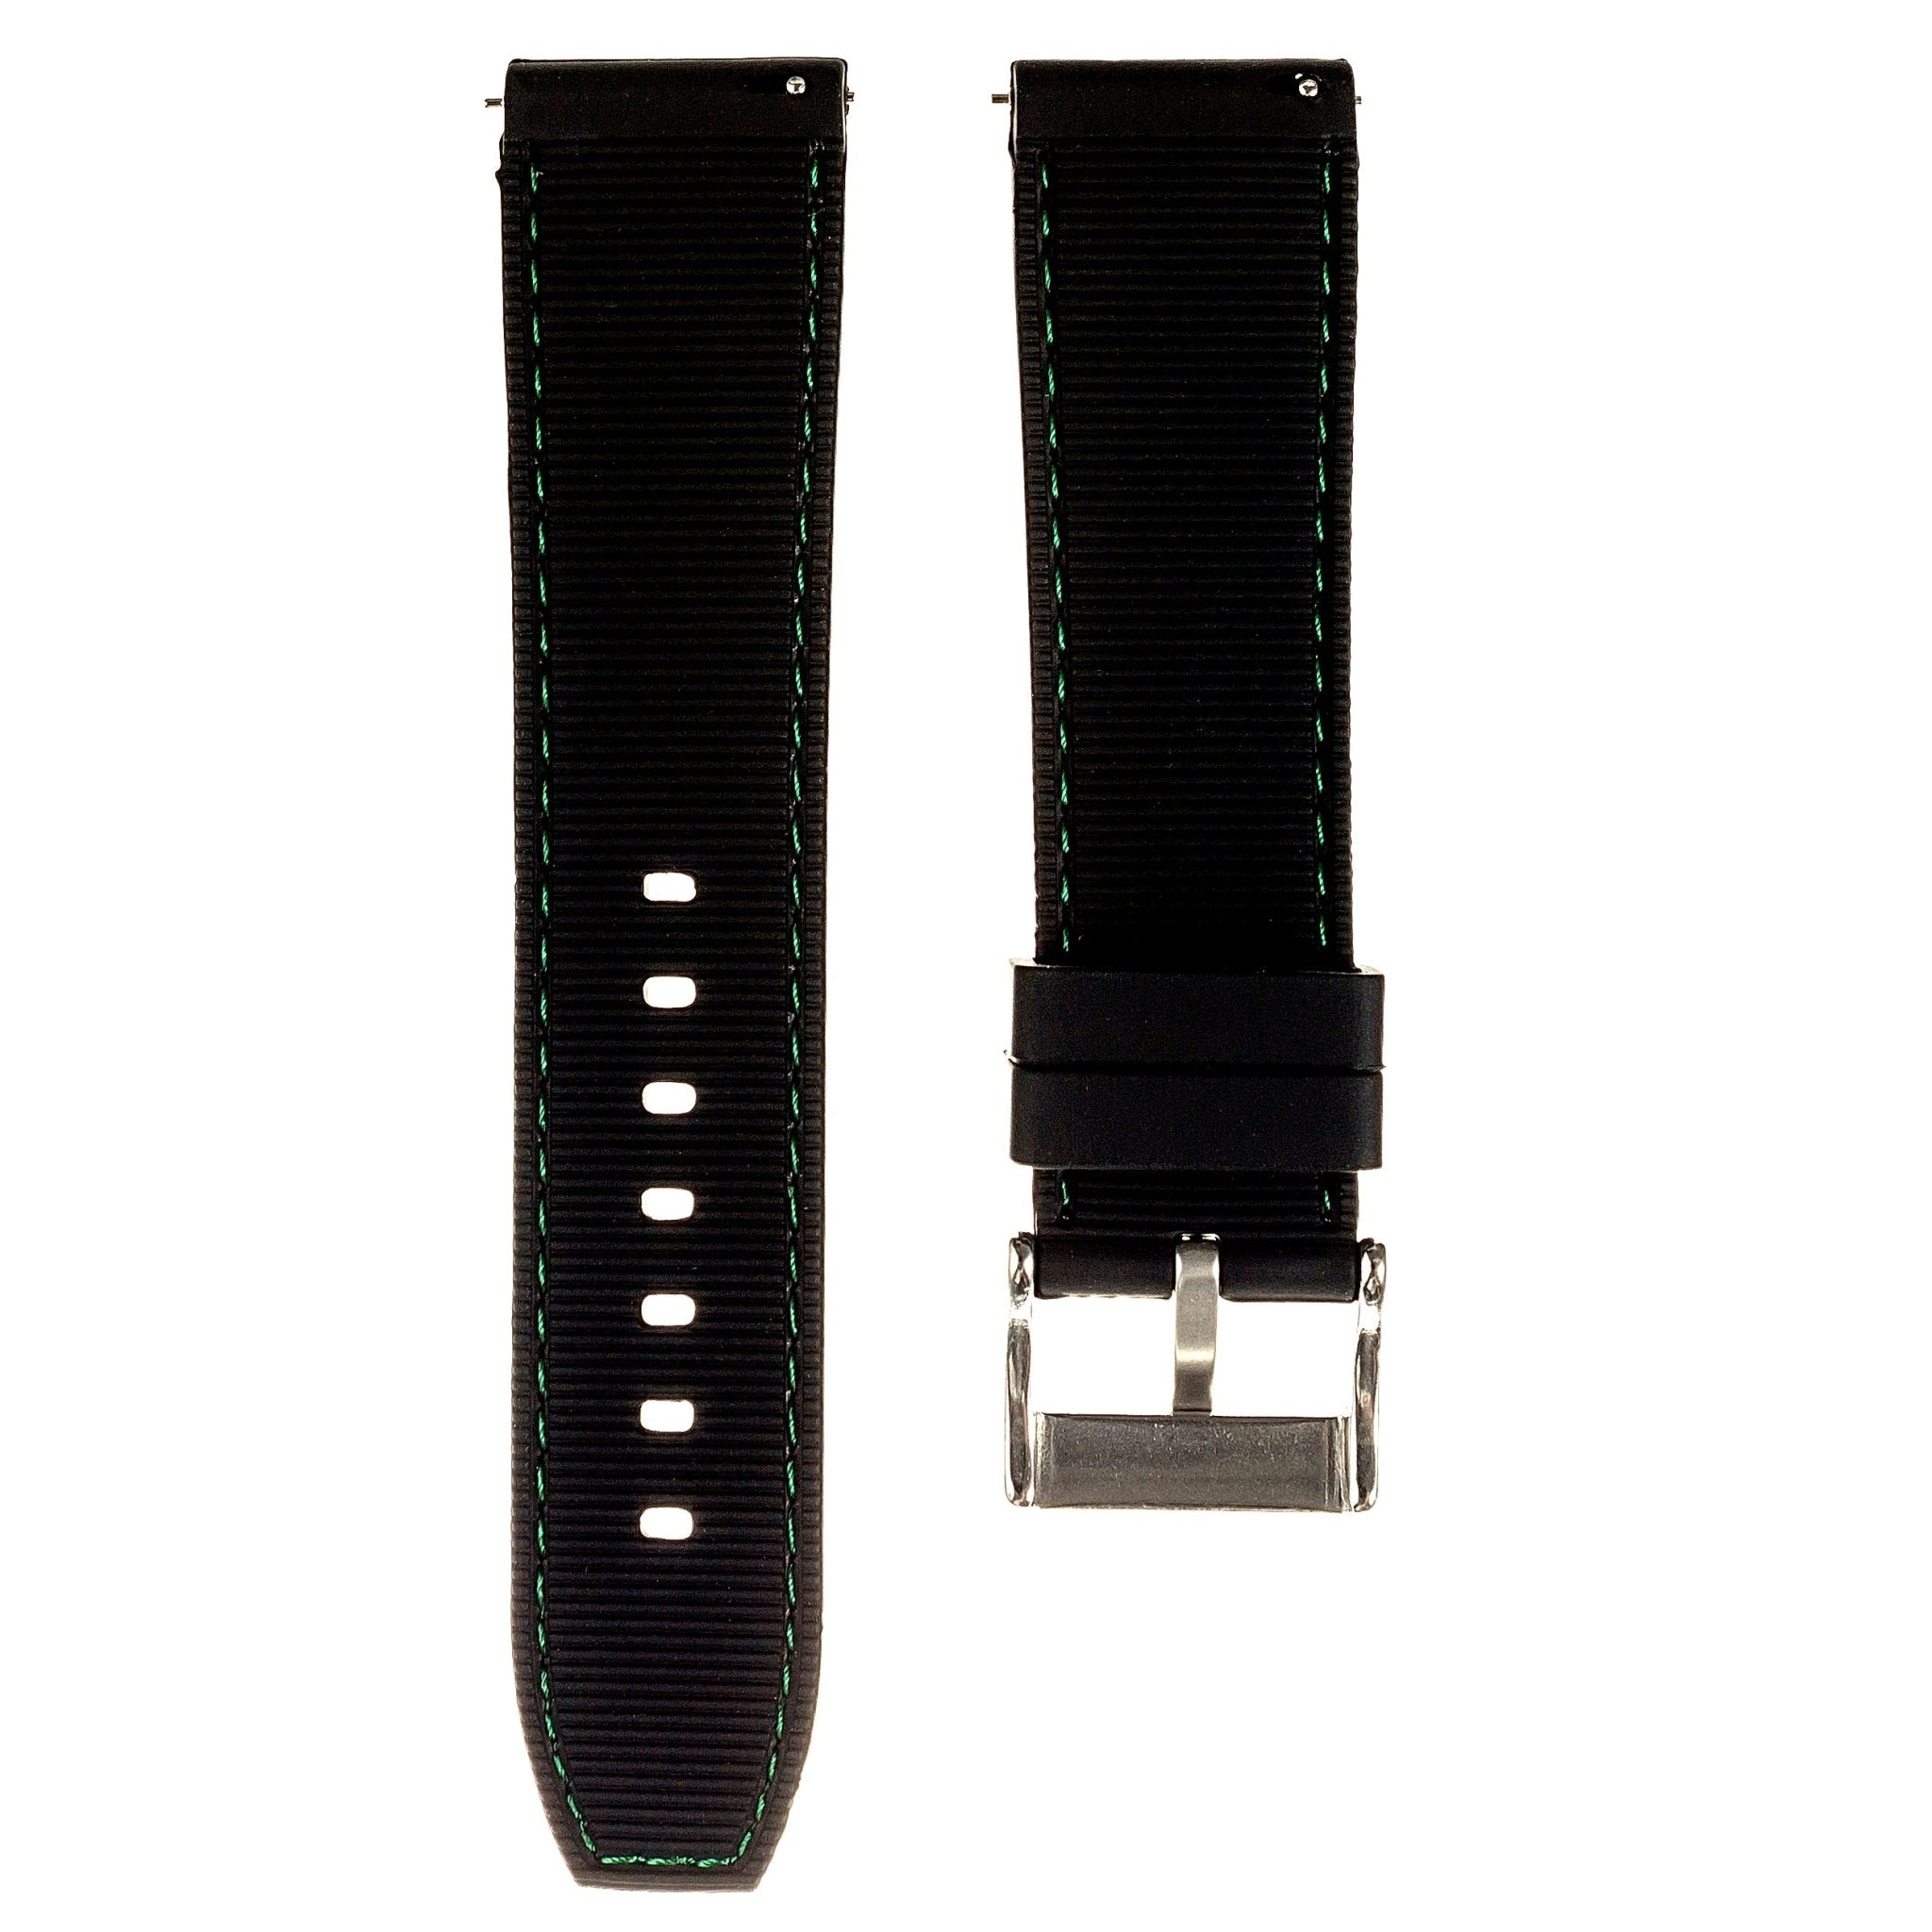 Perforated Stitch Soft Silicone Strap - Quick-Release - Black with Green Stitch (2401) -StrapSeeker